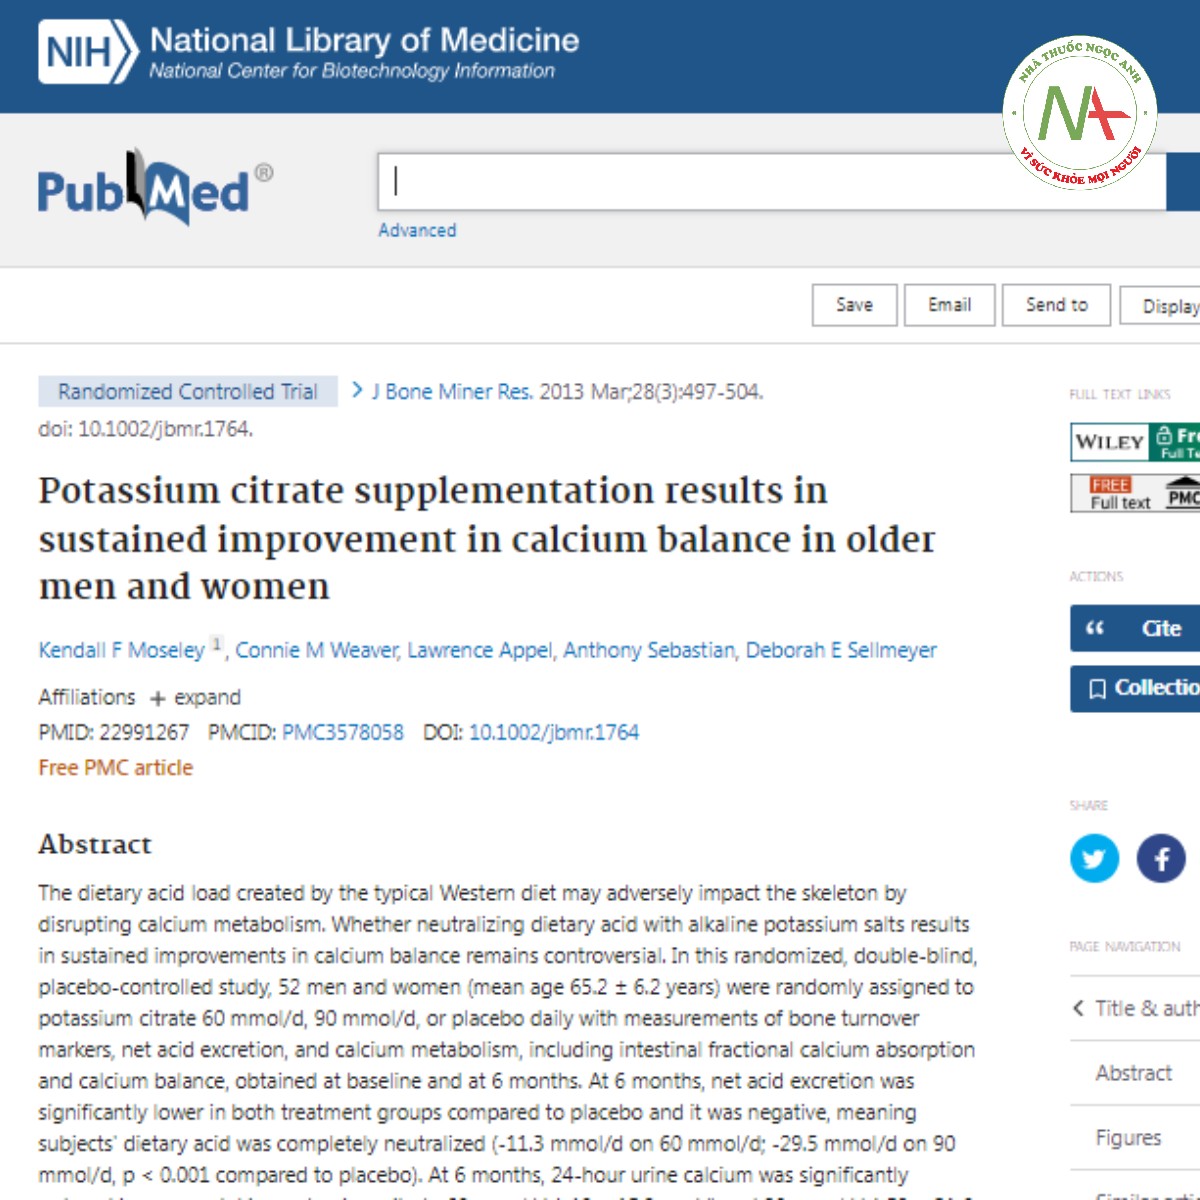 Potassium citrate supplementation results in sustained improvement in calcium balance in older men and women